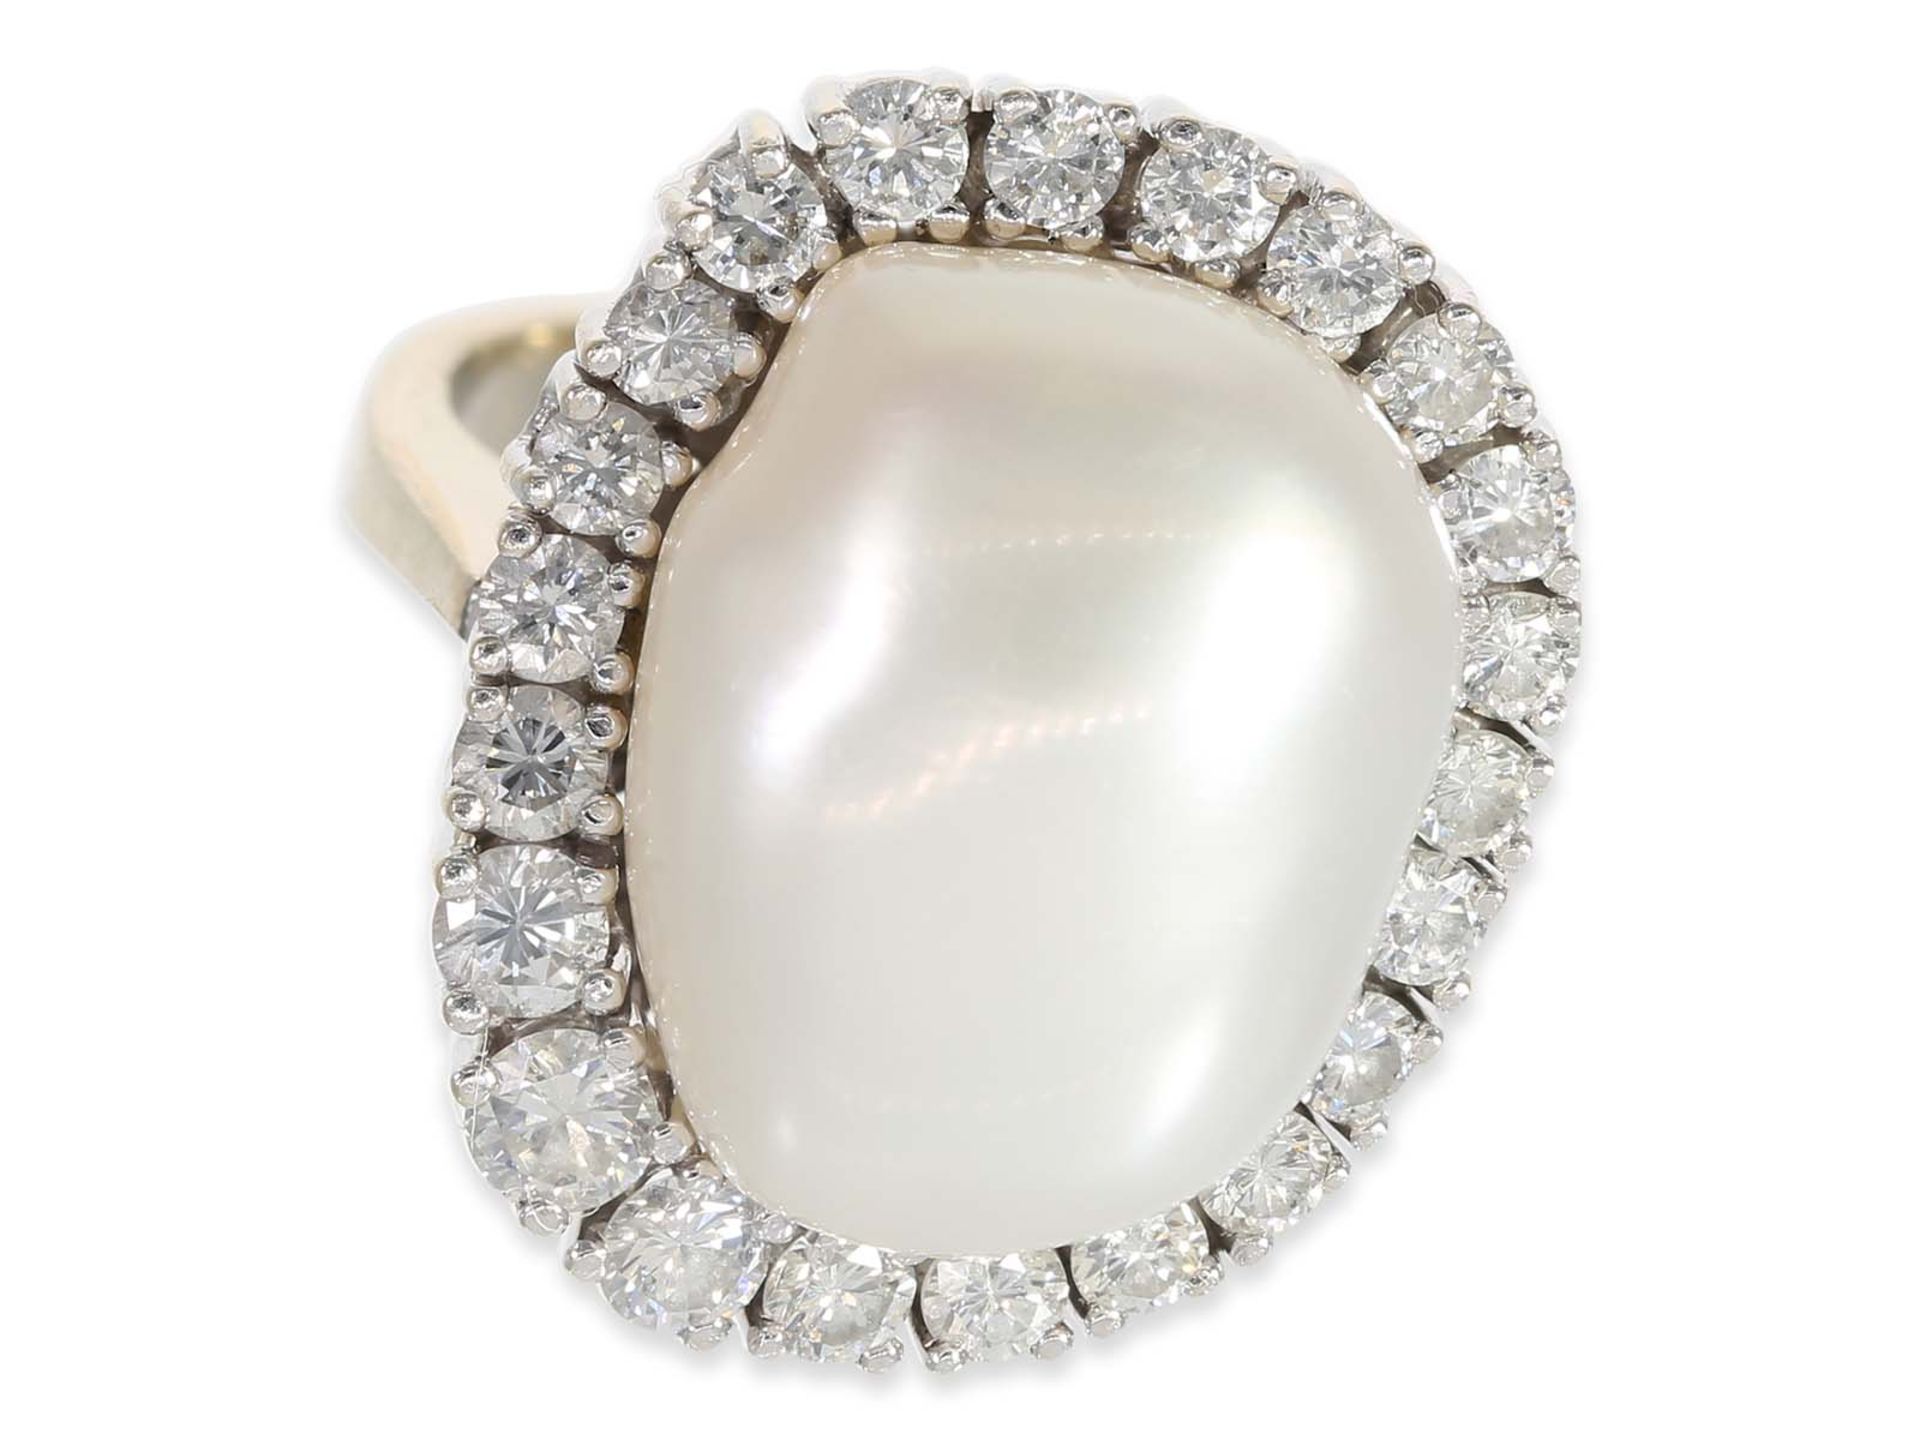 Ring: handmade diamond ring with large baroque cultured pearl, 14K gold - Image 2 of 4